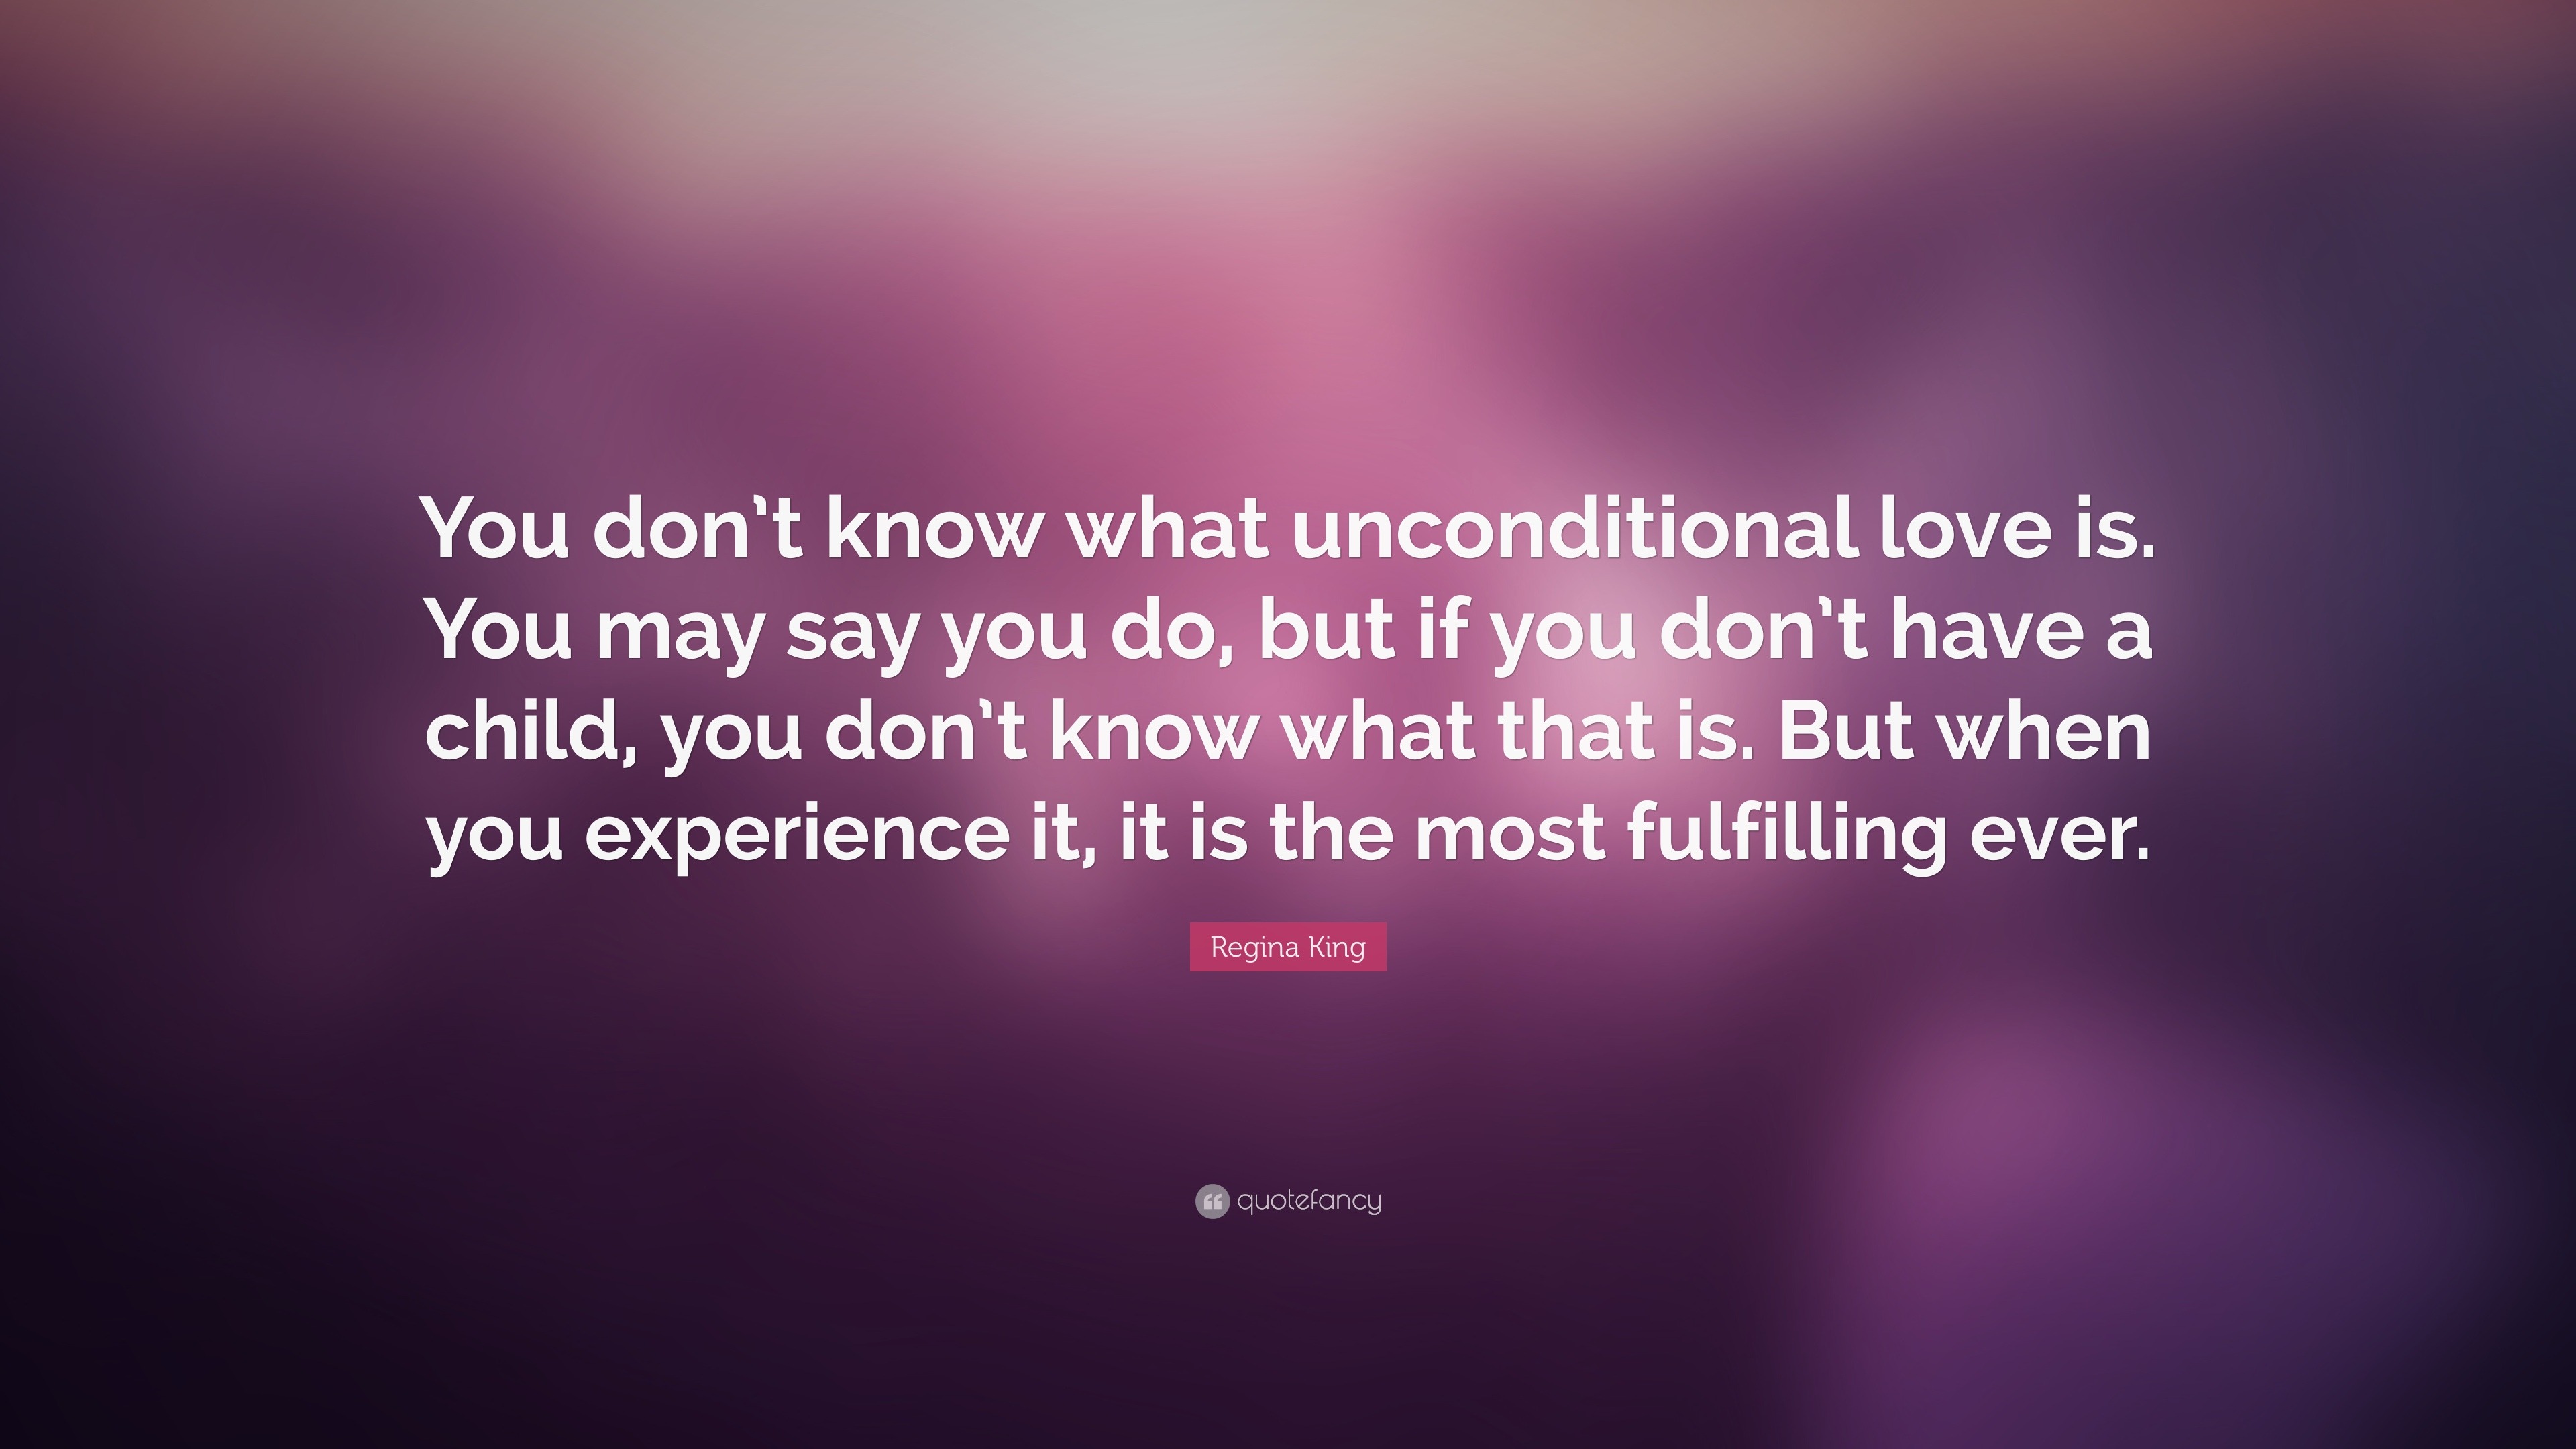 Regina King Quote You Don T Know What Unconditional Love Is You May Say You Do But If You Don T Have A Child You Don T Know What That I 7 Wallpapers Quotefancy